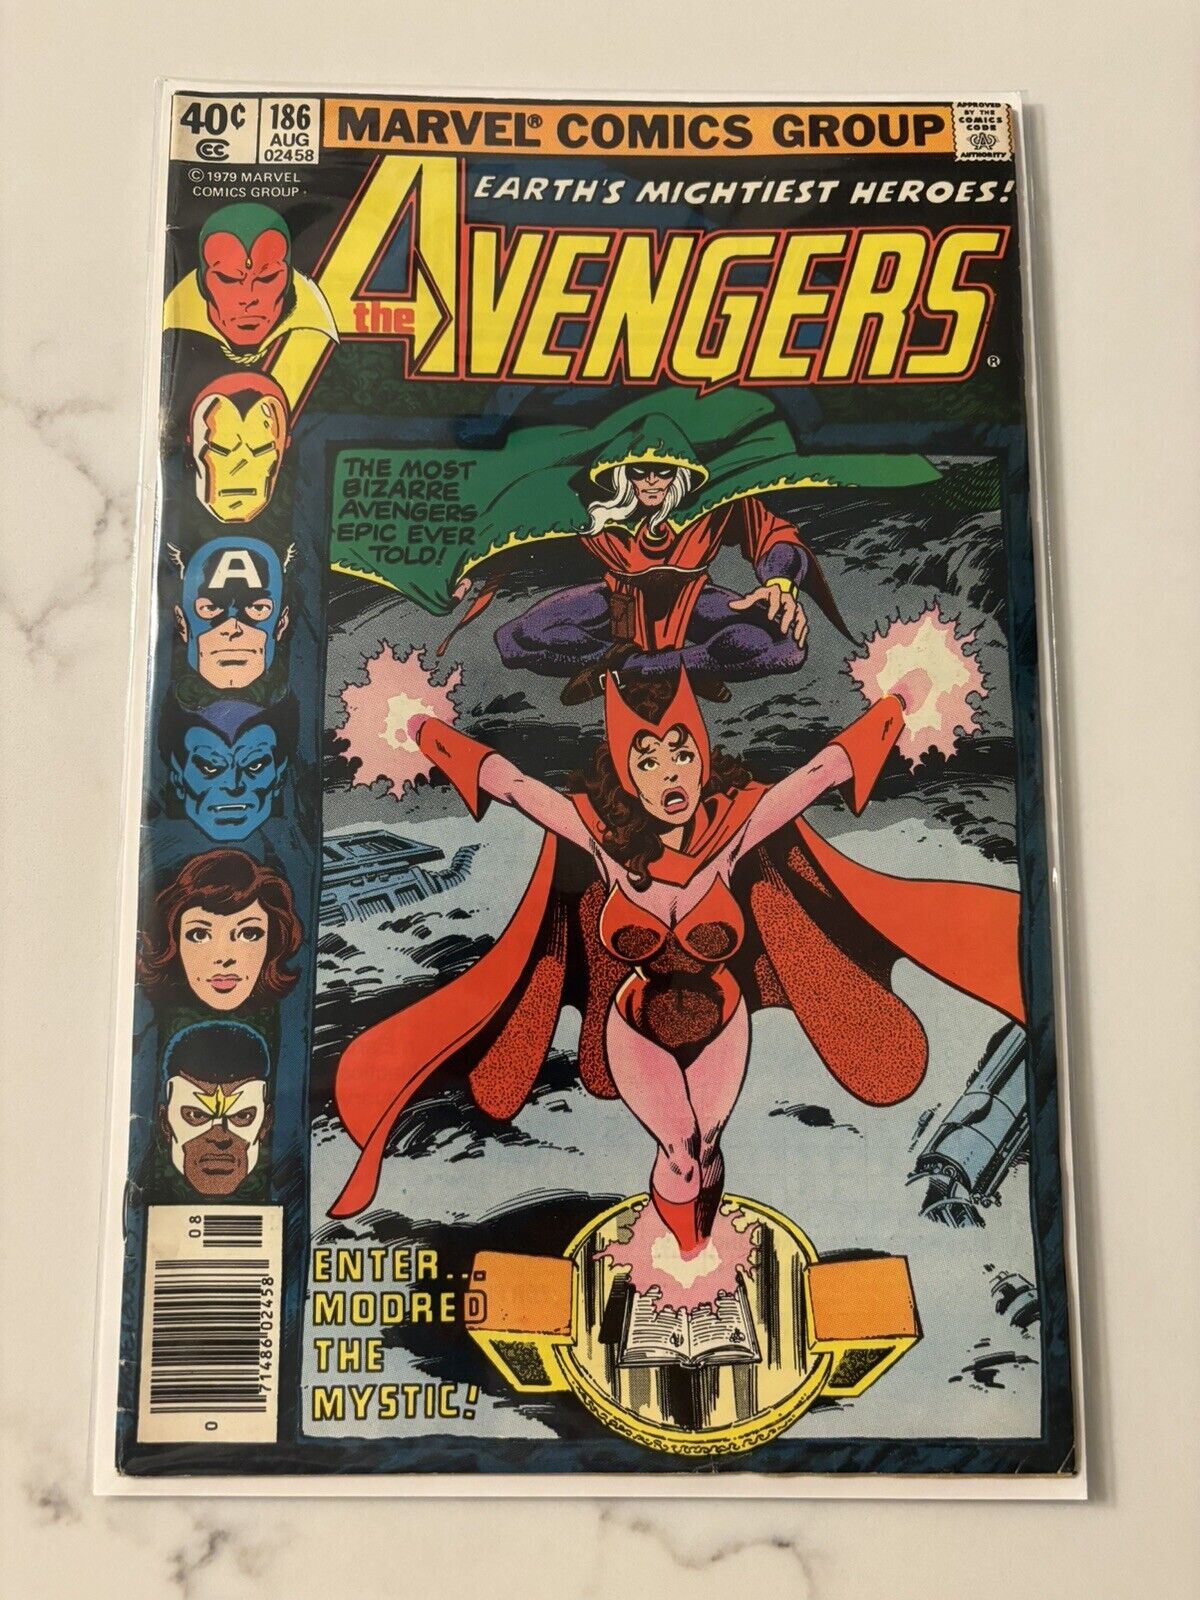 The Avengers #186 1979 SCARLET WITCH ORIGIN & 1ST APPEARANCE Chthon & Magda